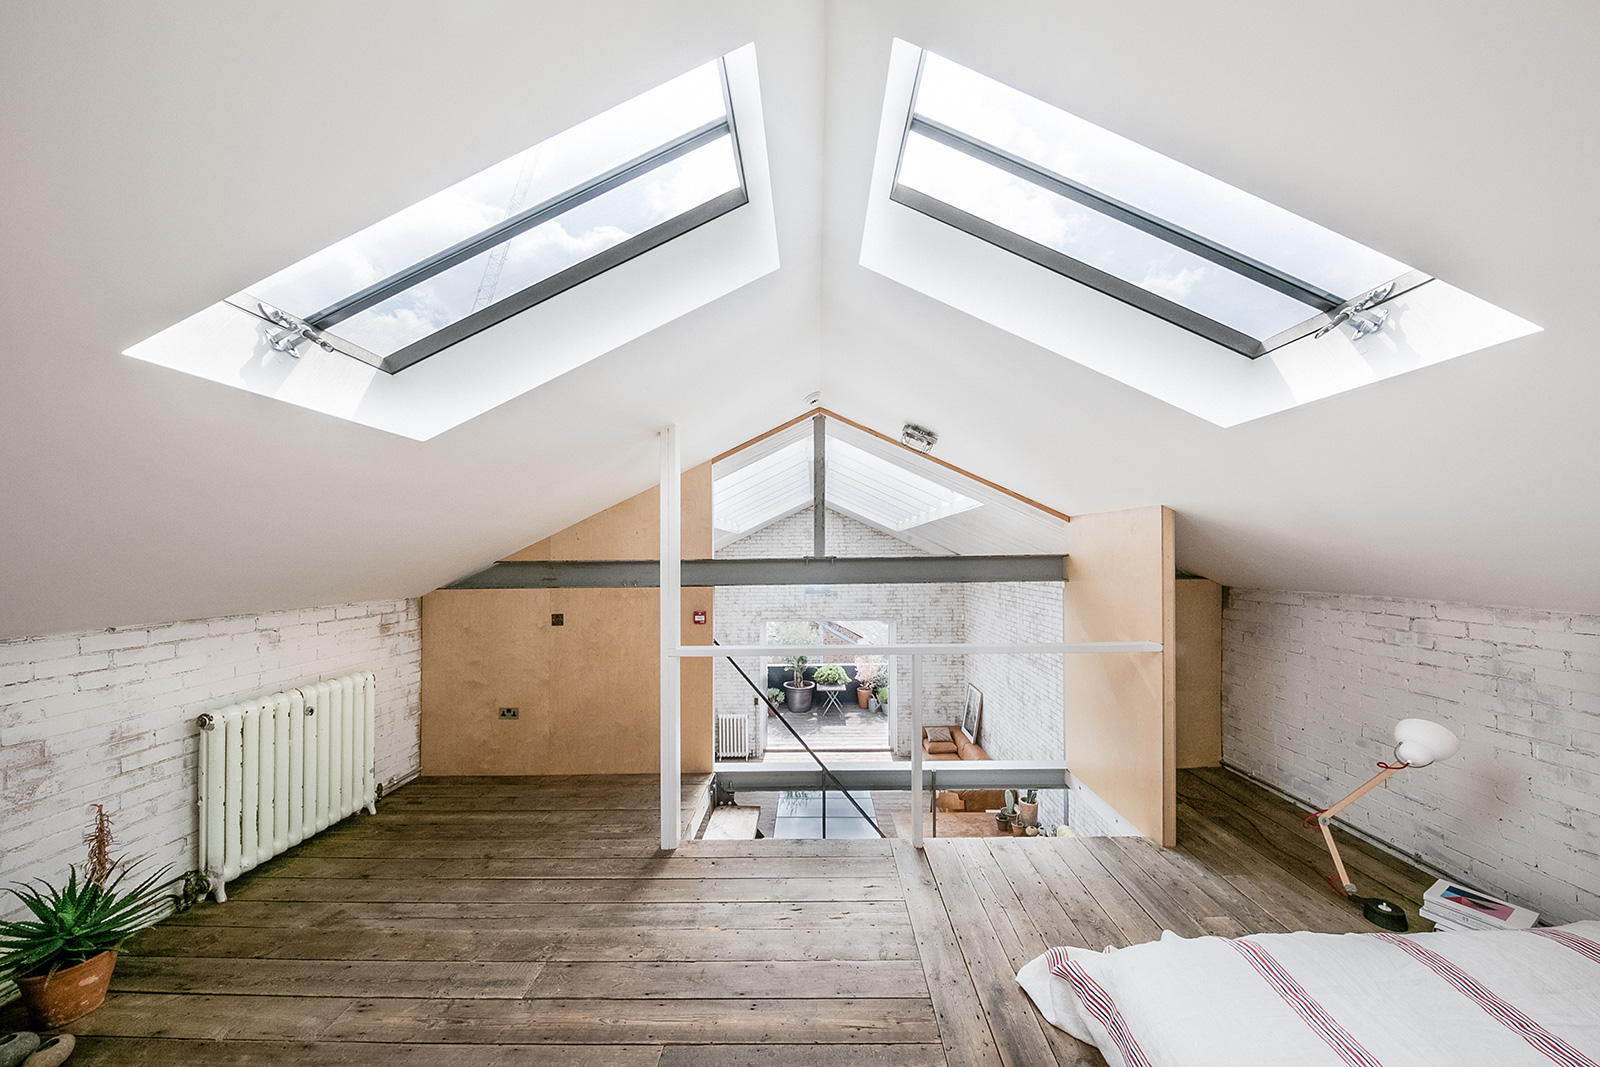 A light-filled warehouse conversion hits the market in east London